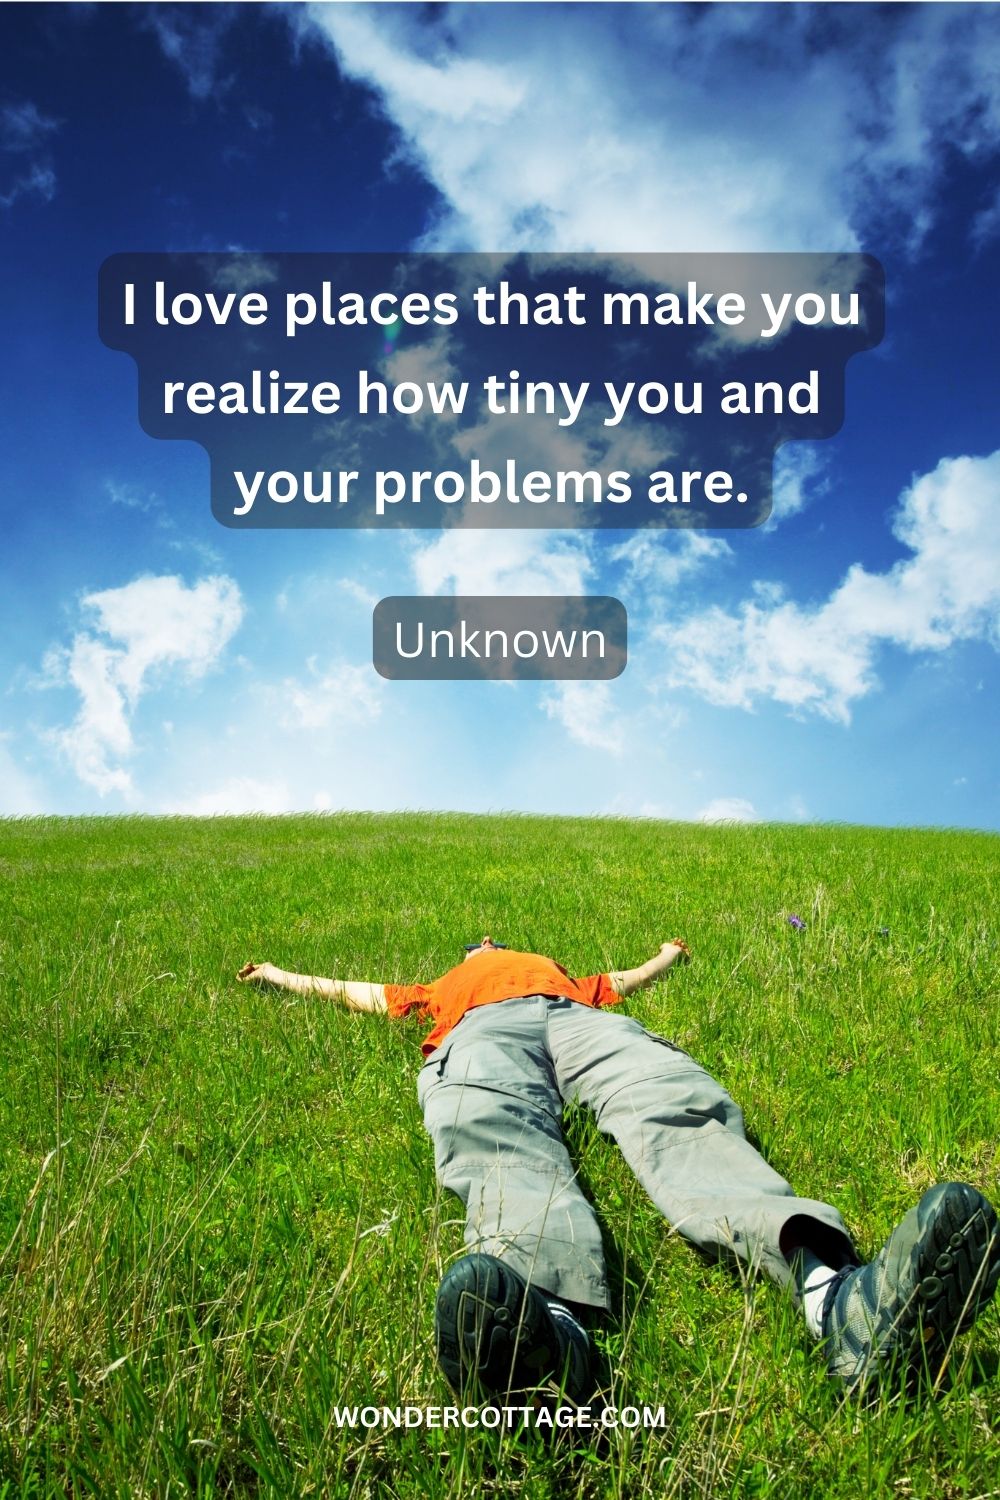 I love places that make you realize how tiny you and your problems are. Unknown